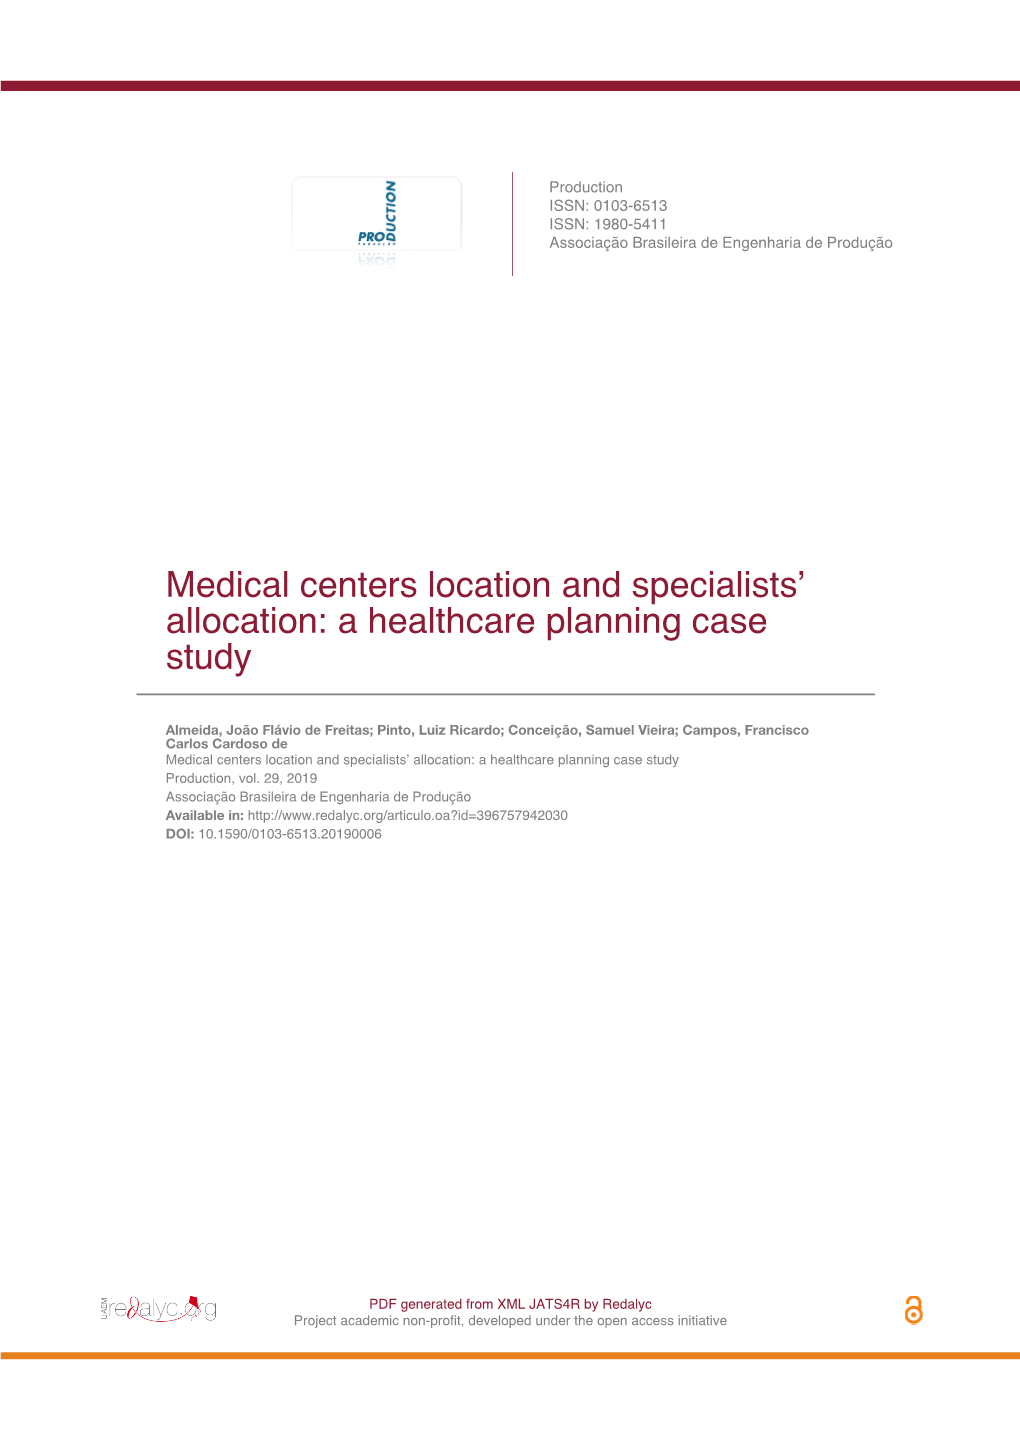 Medical Centers Location and Specialists' Allocation: a Healthcare Planning Case Study